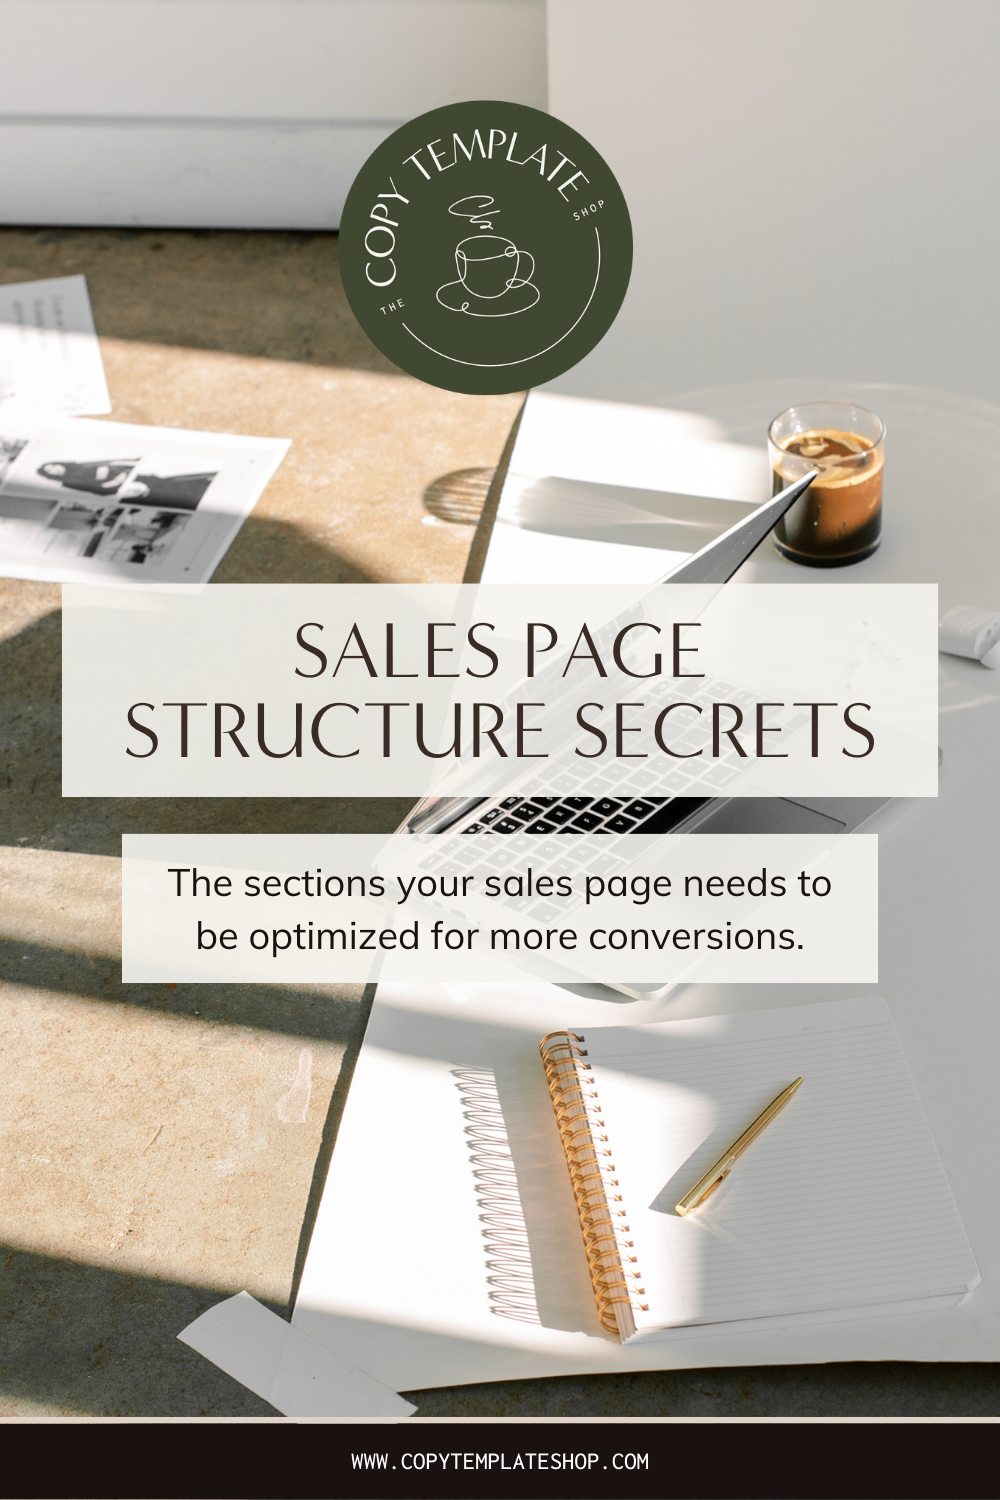 Sales Page Structure Secrets A Guide for More Conversions